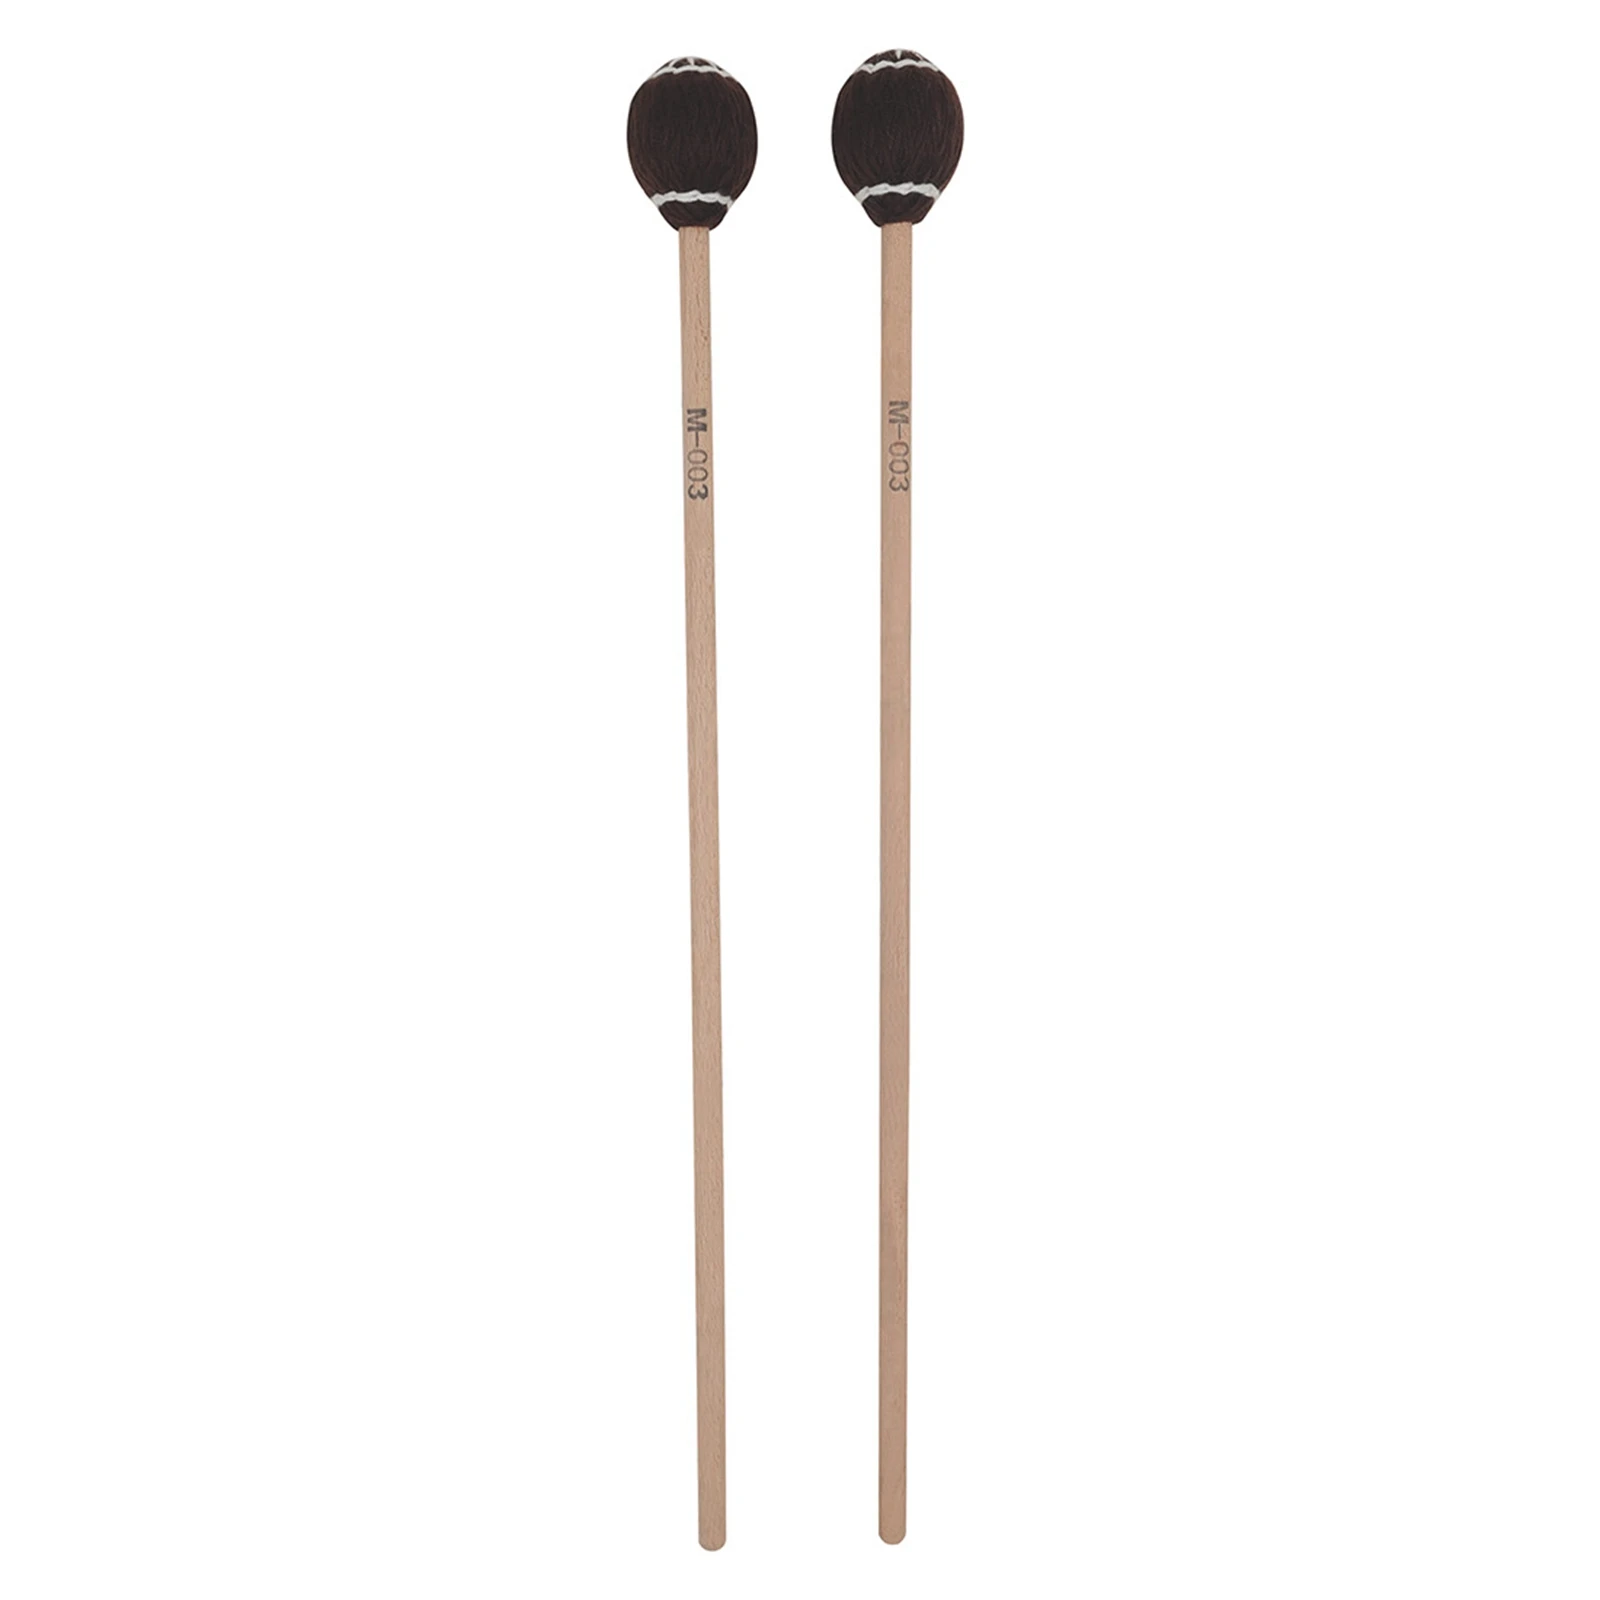 2pcs Keyboard Marimba Mallets Maple Handle Soft Head Professionals Drumstick Drums Percussion Accessory Music Play Parts